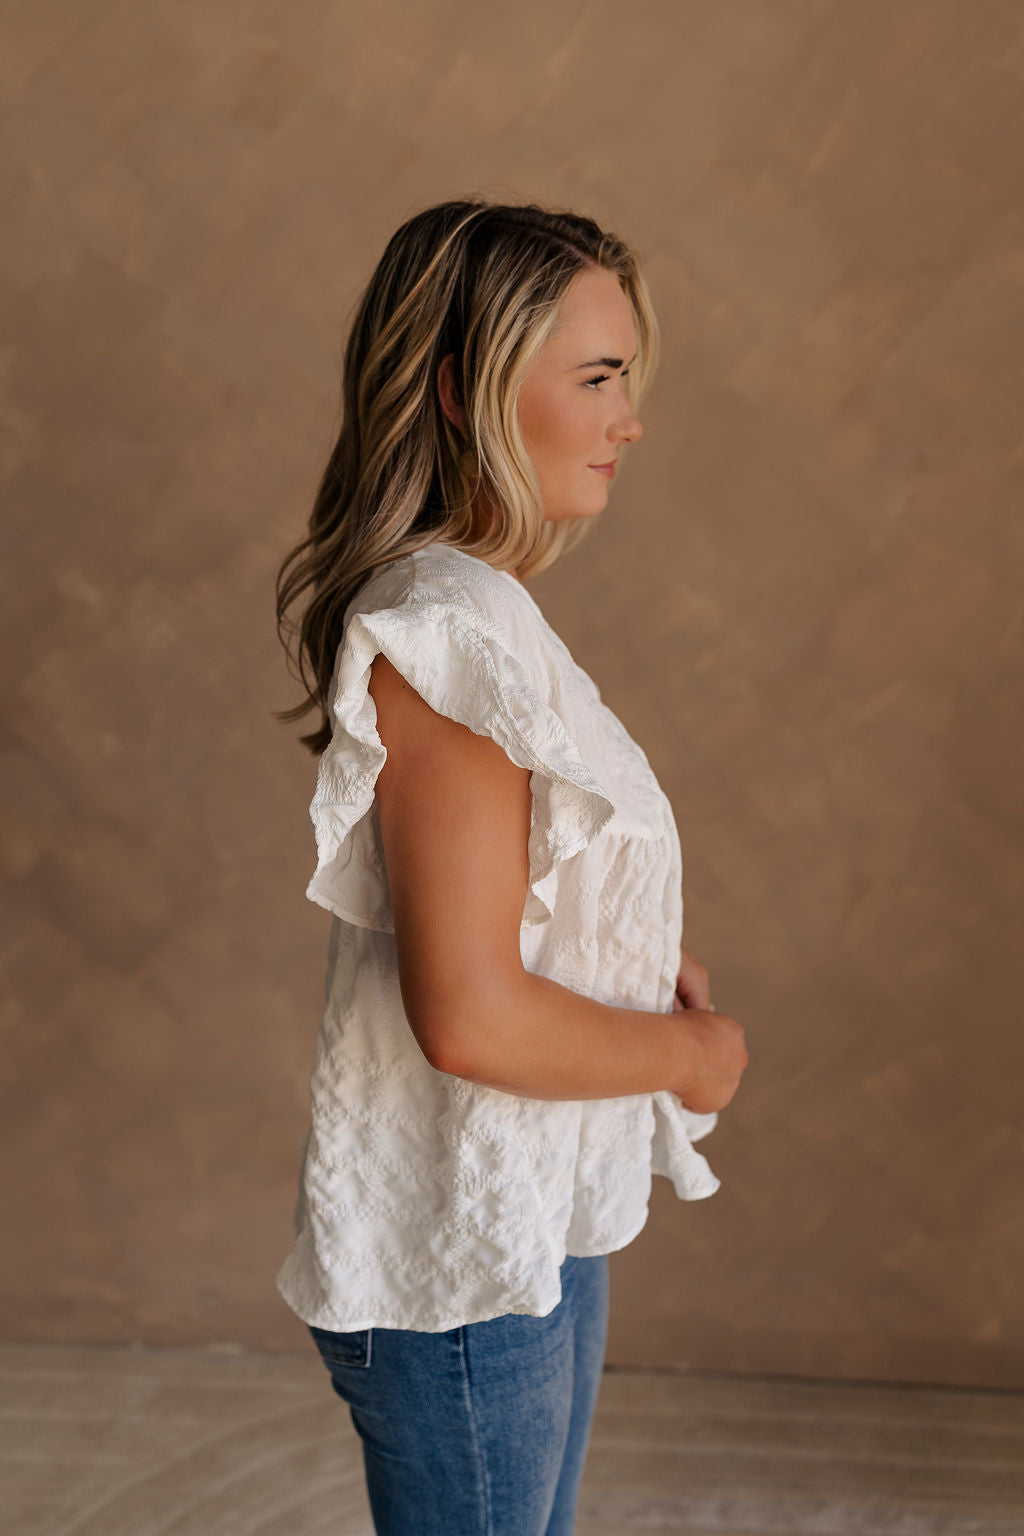 Upper body side view of female model wearing the Vivienne White Textured Top that has white textured fabric, short ruffled sleeves, and v neckline. worn with jeans.